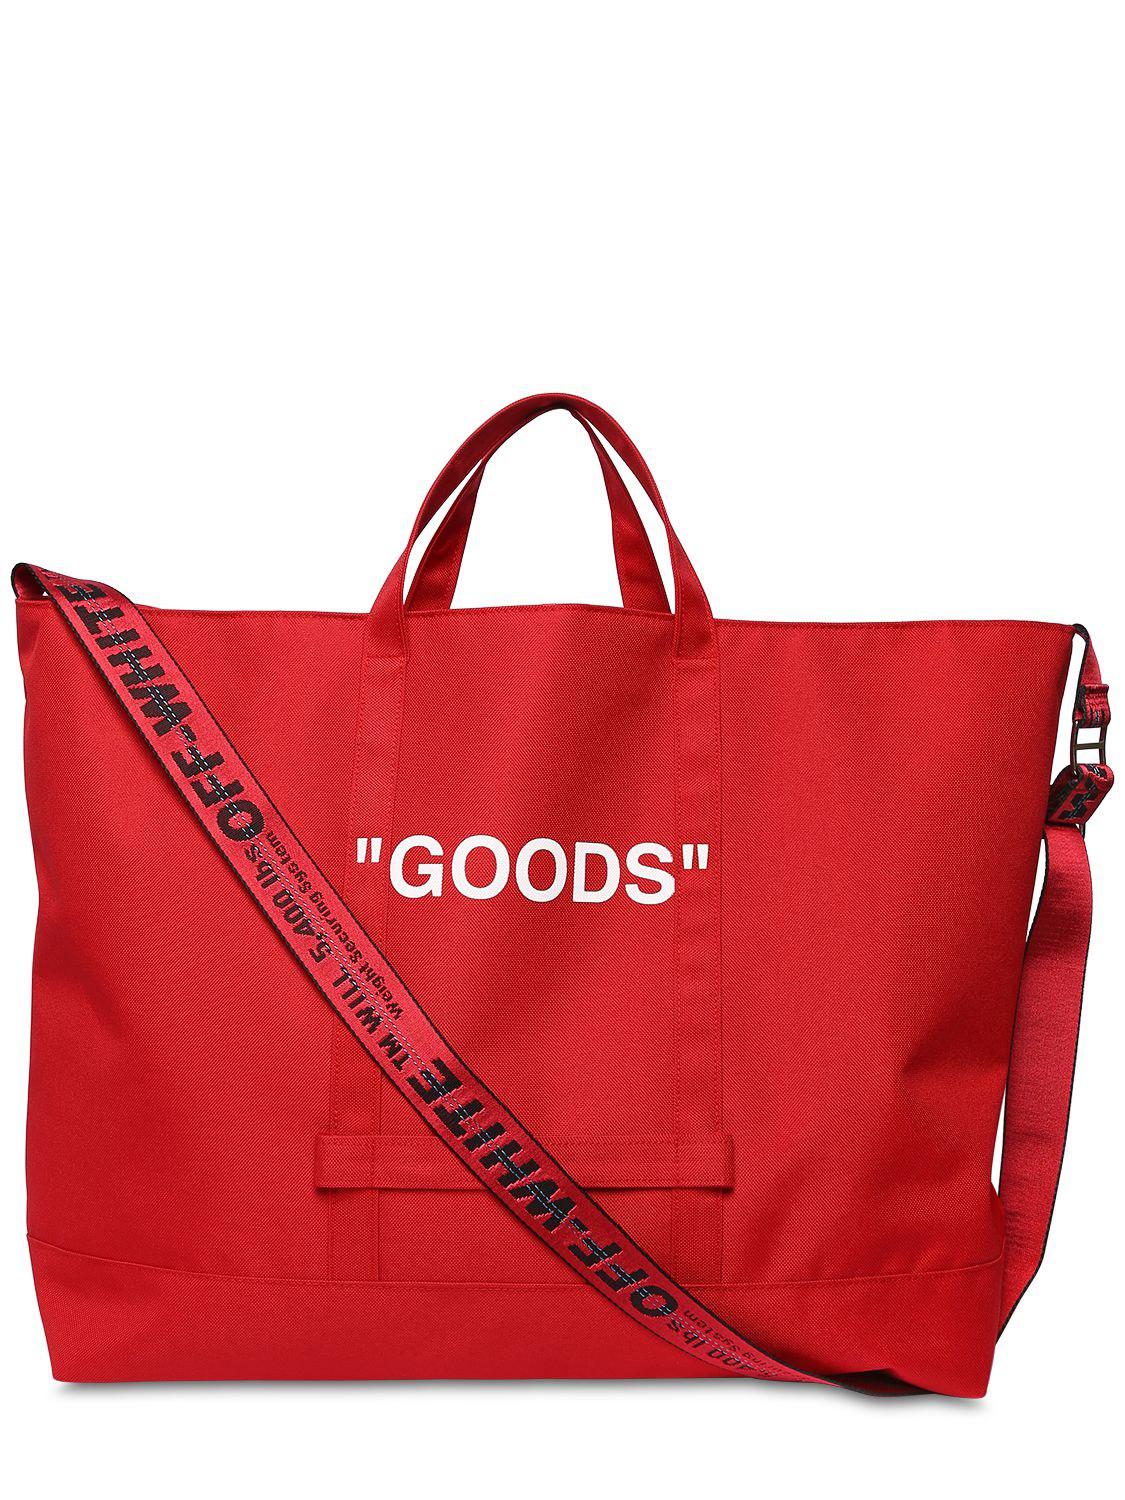 Off-White c/o Virgil Abloh Synthetic """goods"" Nylon Tote Bag" in Red/White  (Red) - Lyst